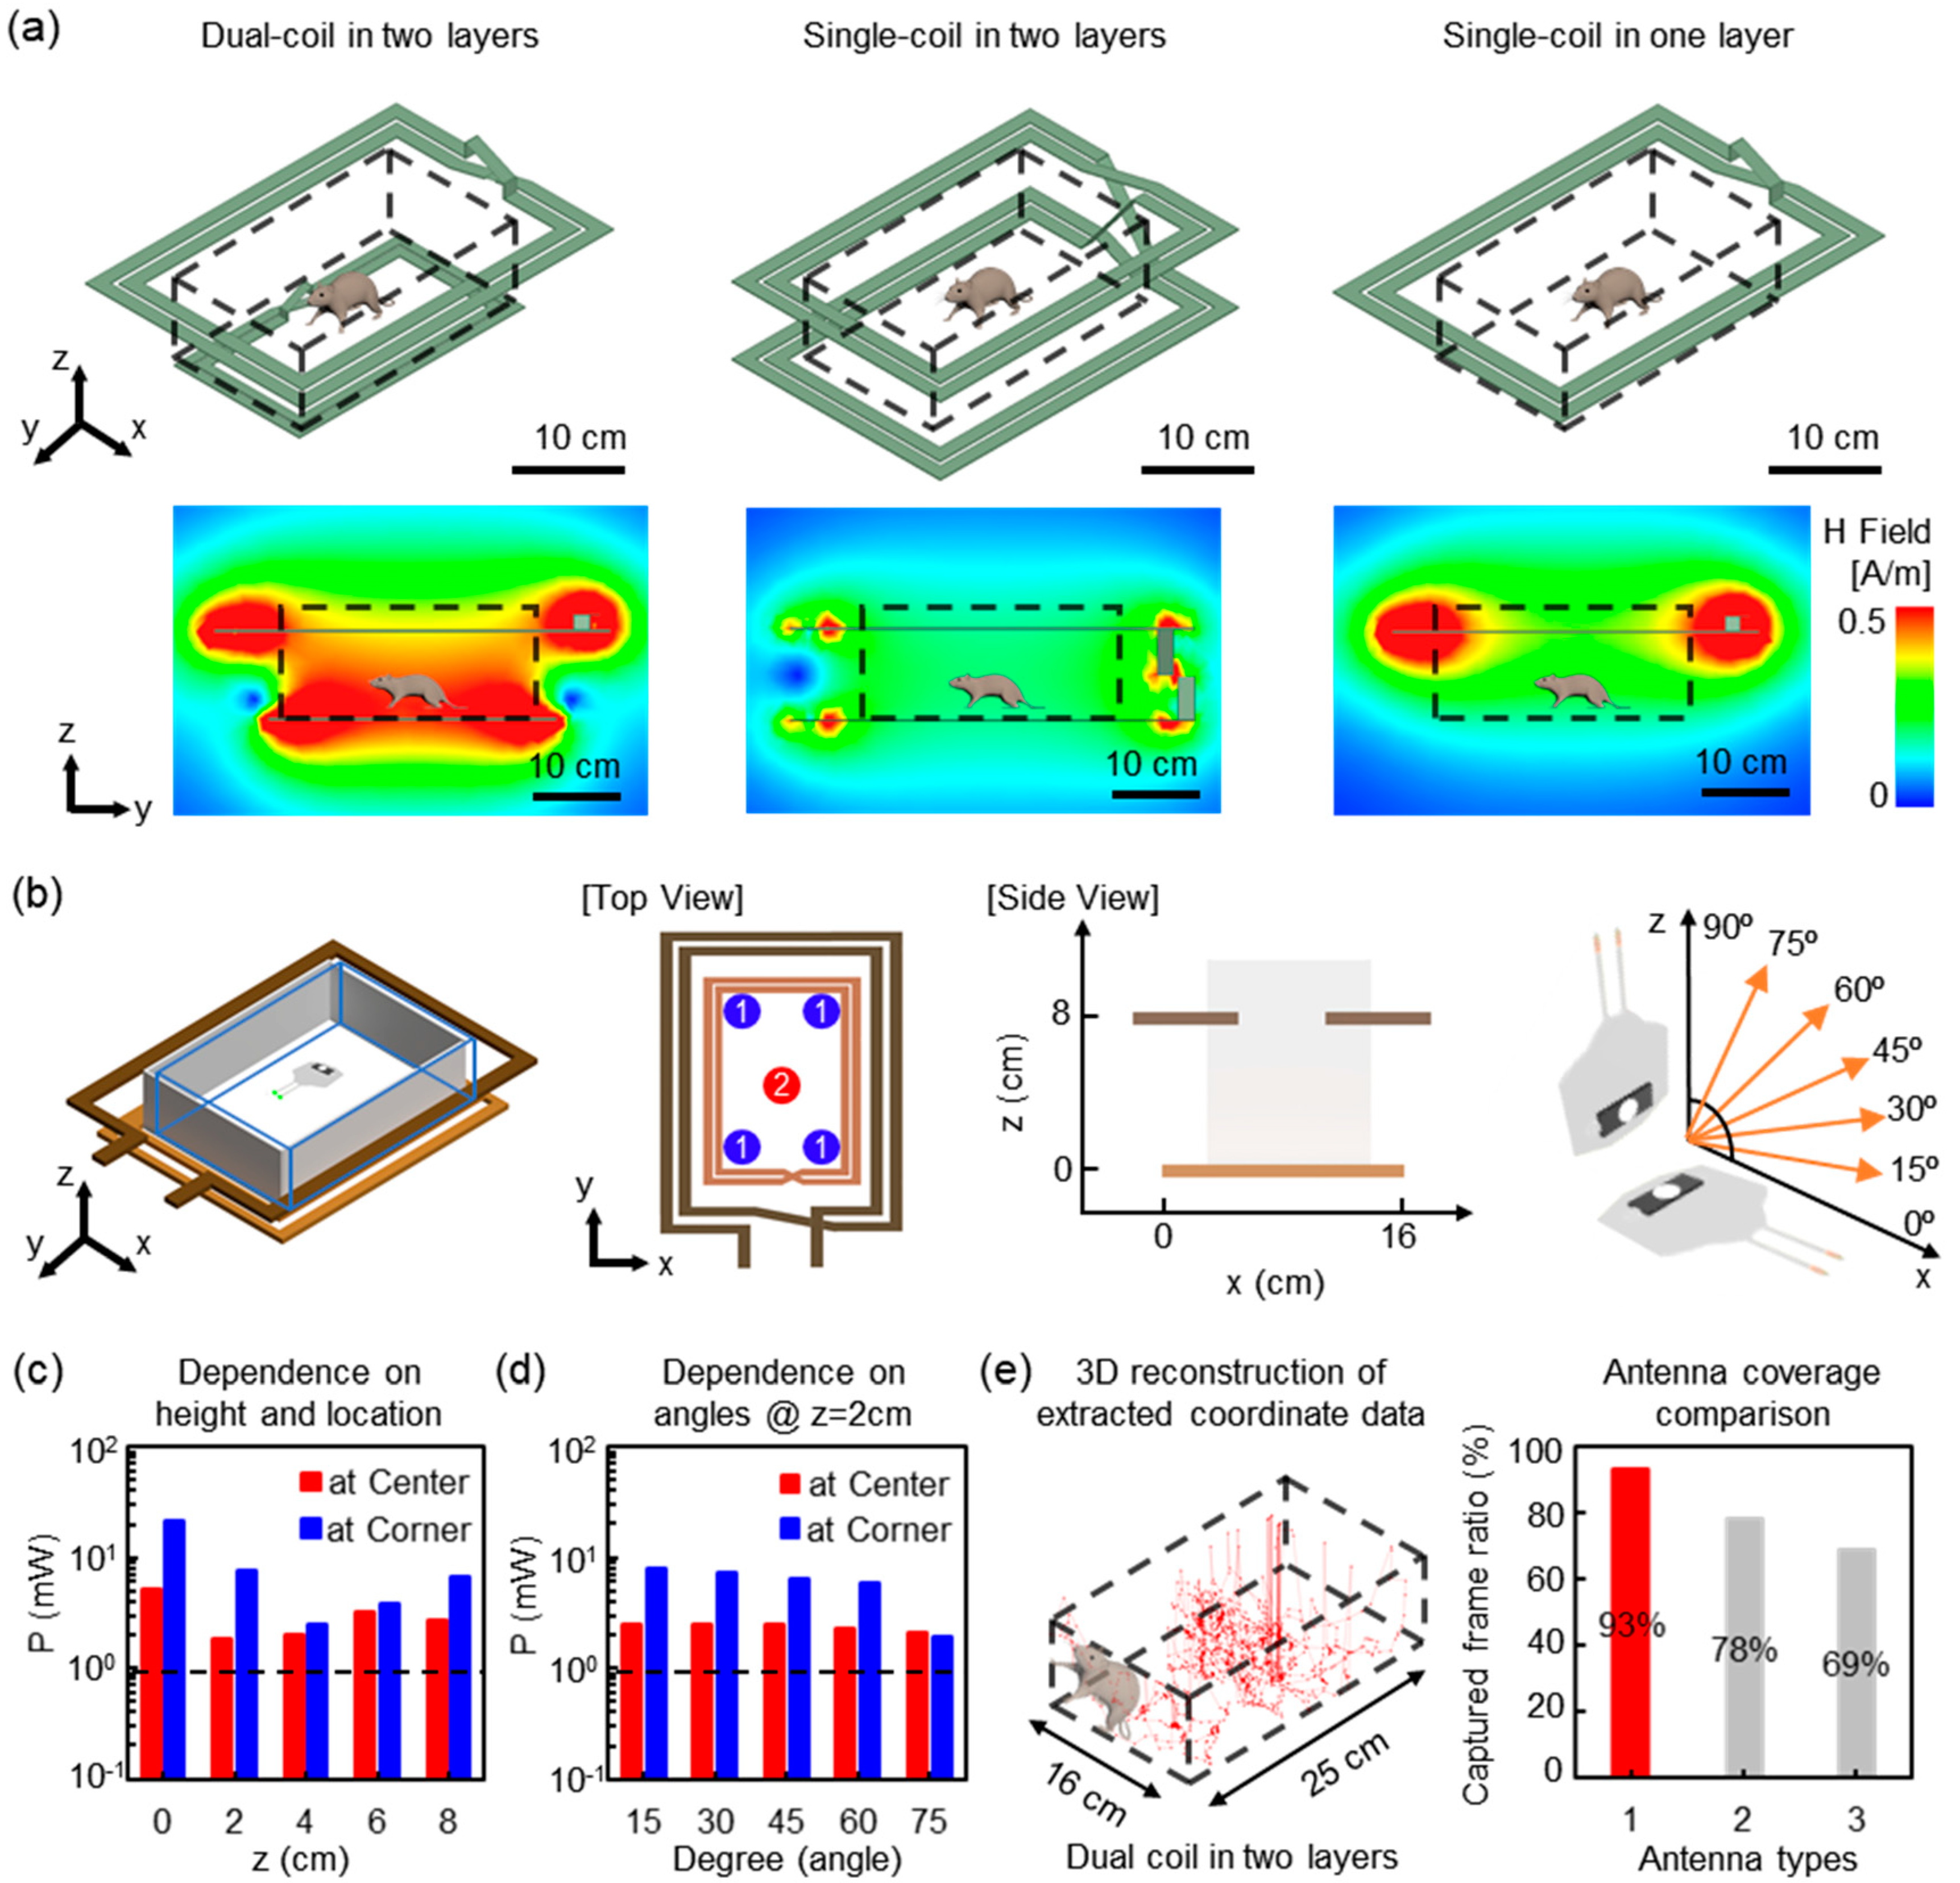 Soft, stretchable, fully implantable miniaturized optoelectronic systems  for wireless optogenetics